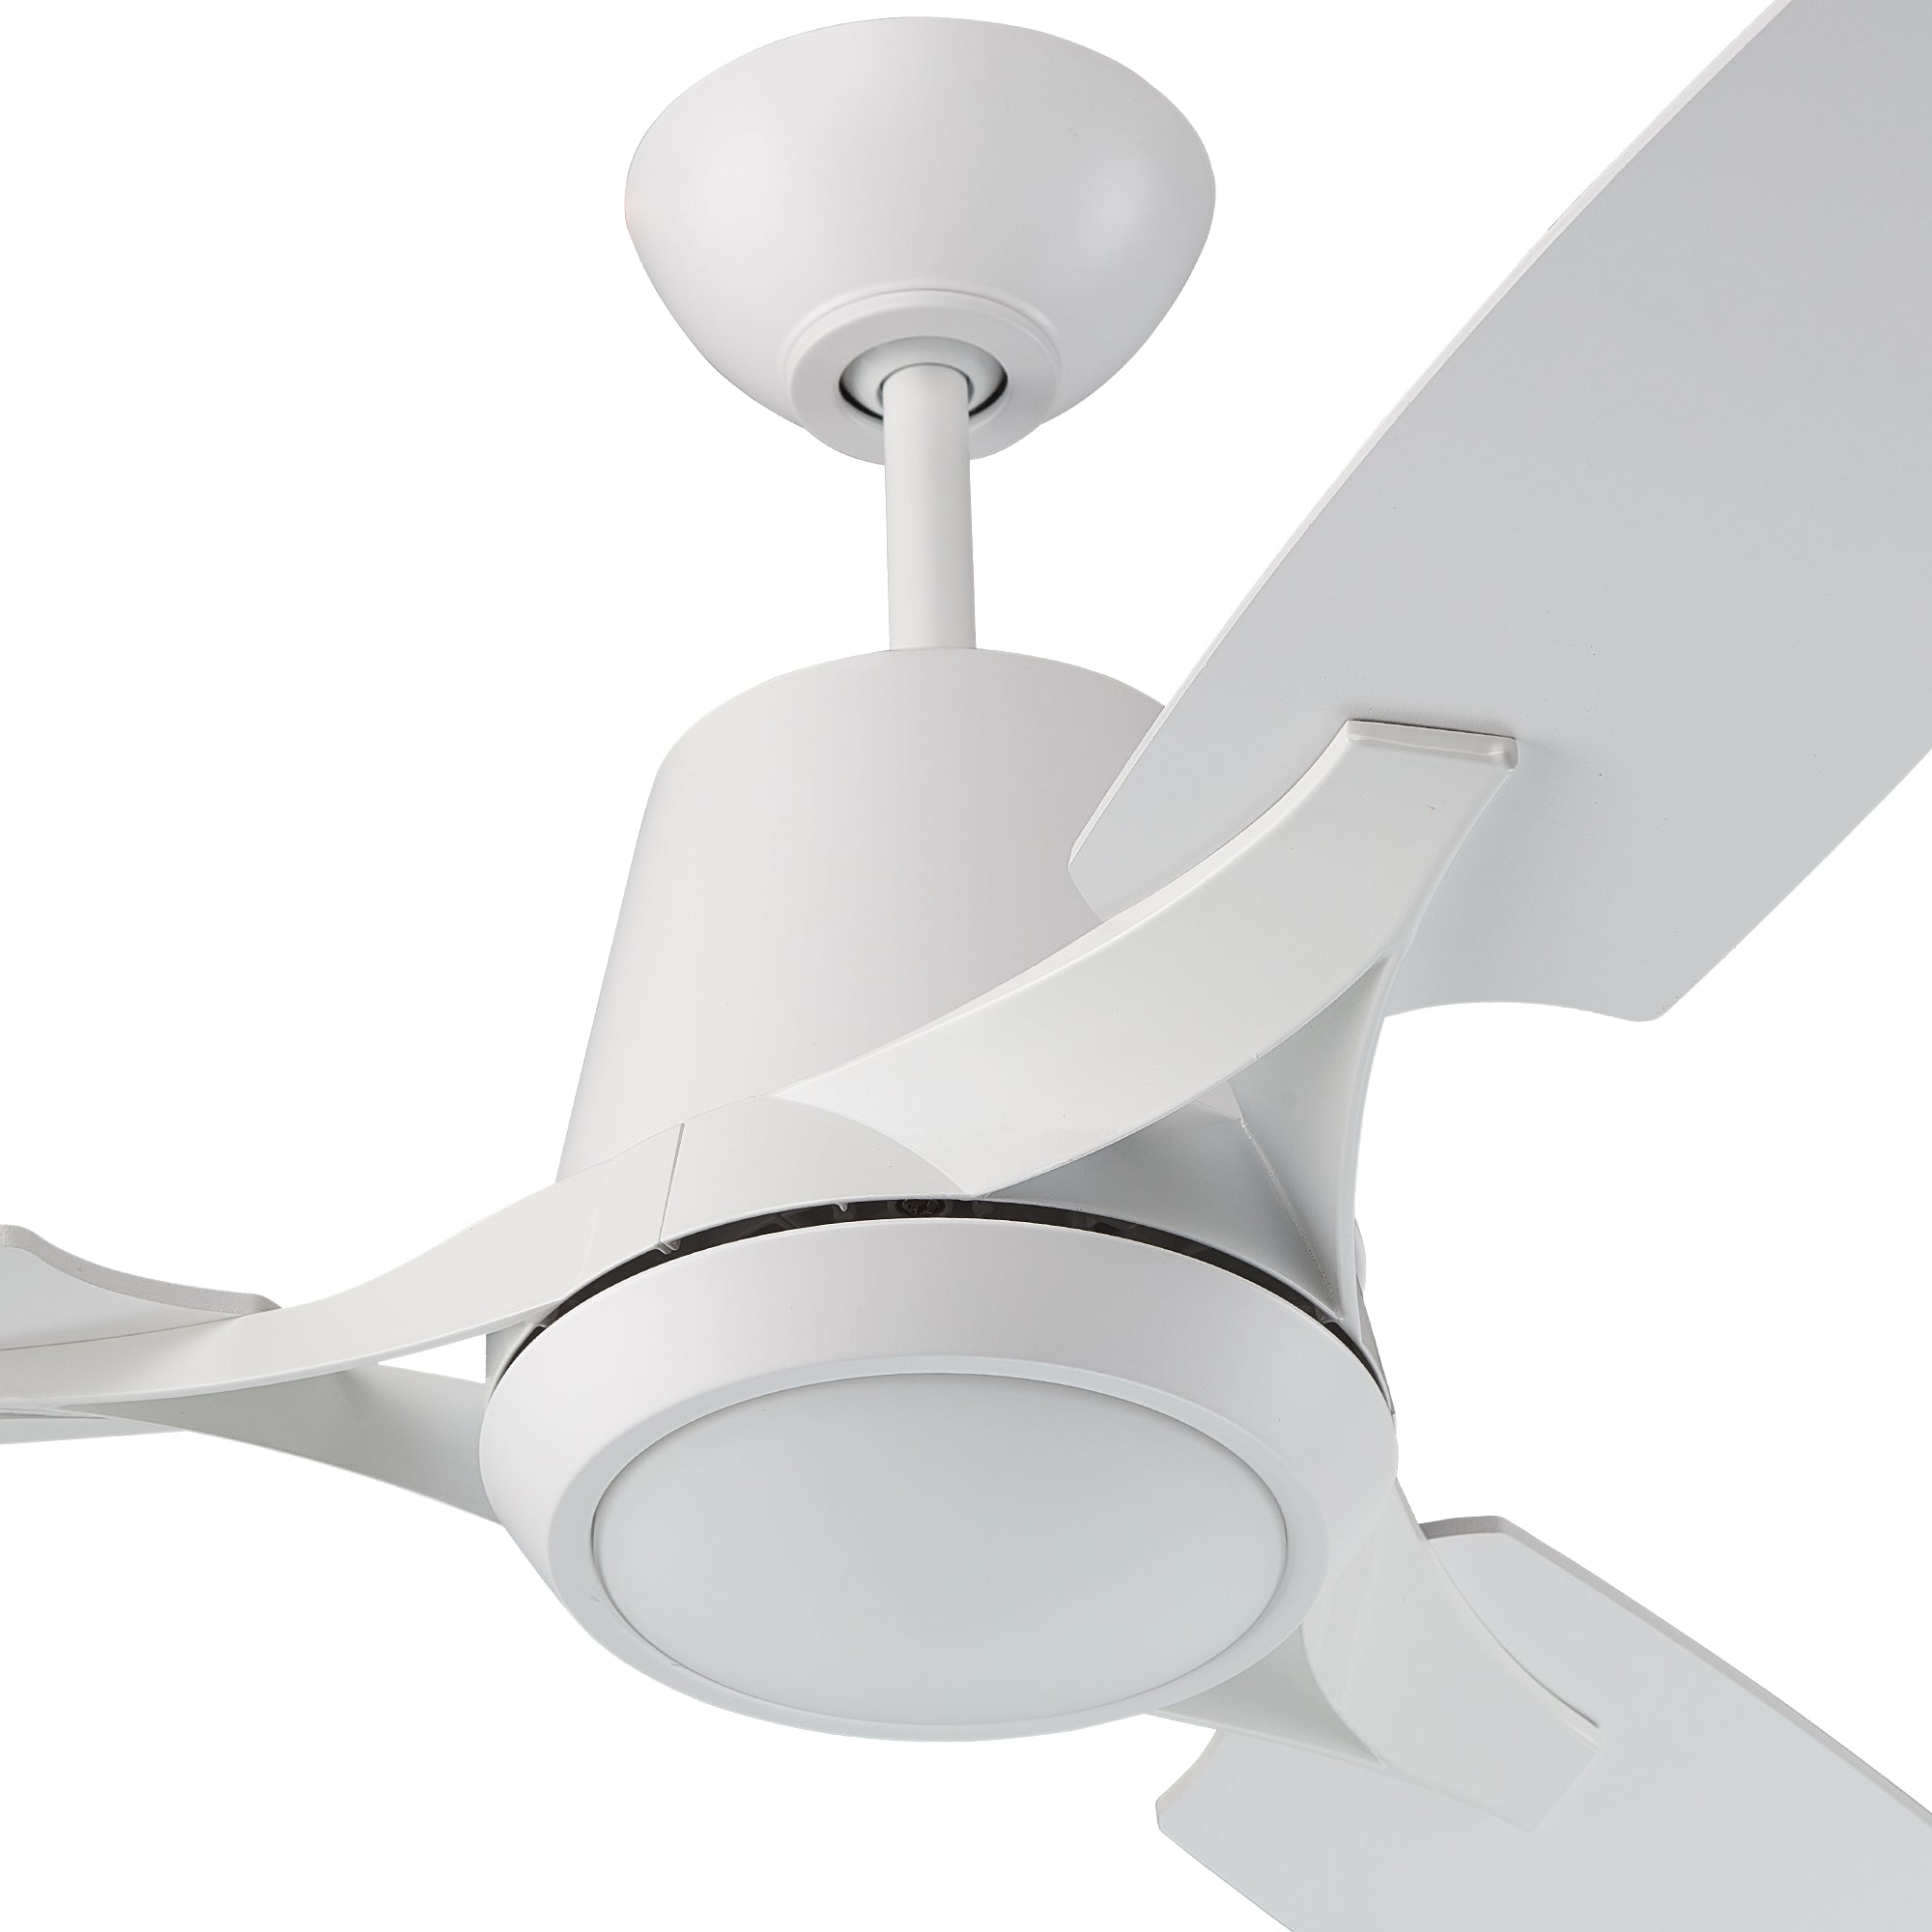 The Smafan Exton 52&#39;&#39; Smart Ceiling Fan keeps your space cool, bright, and stylish. It is a soft modern masterpiece perfect for your large indoor living spaces. This Wifi smart ceiling fan is a simplicity designing with Black finish, use elegant Plywood blades and compatible with LED Light. The fan features wall control, Wi-Fi apps, Siri Shortcut and Voice control technology (compatible with Amazon Alexa and Google Home Assistant ) to set fan preferences.